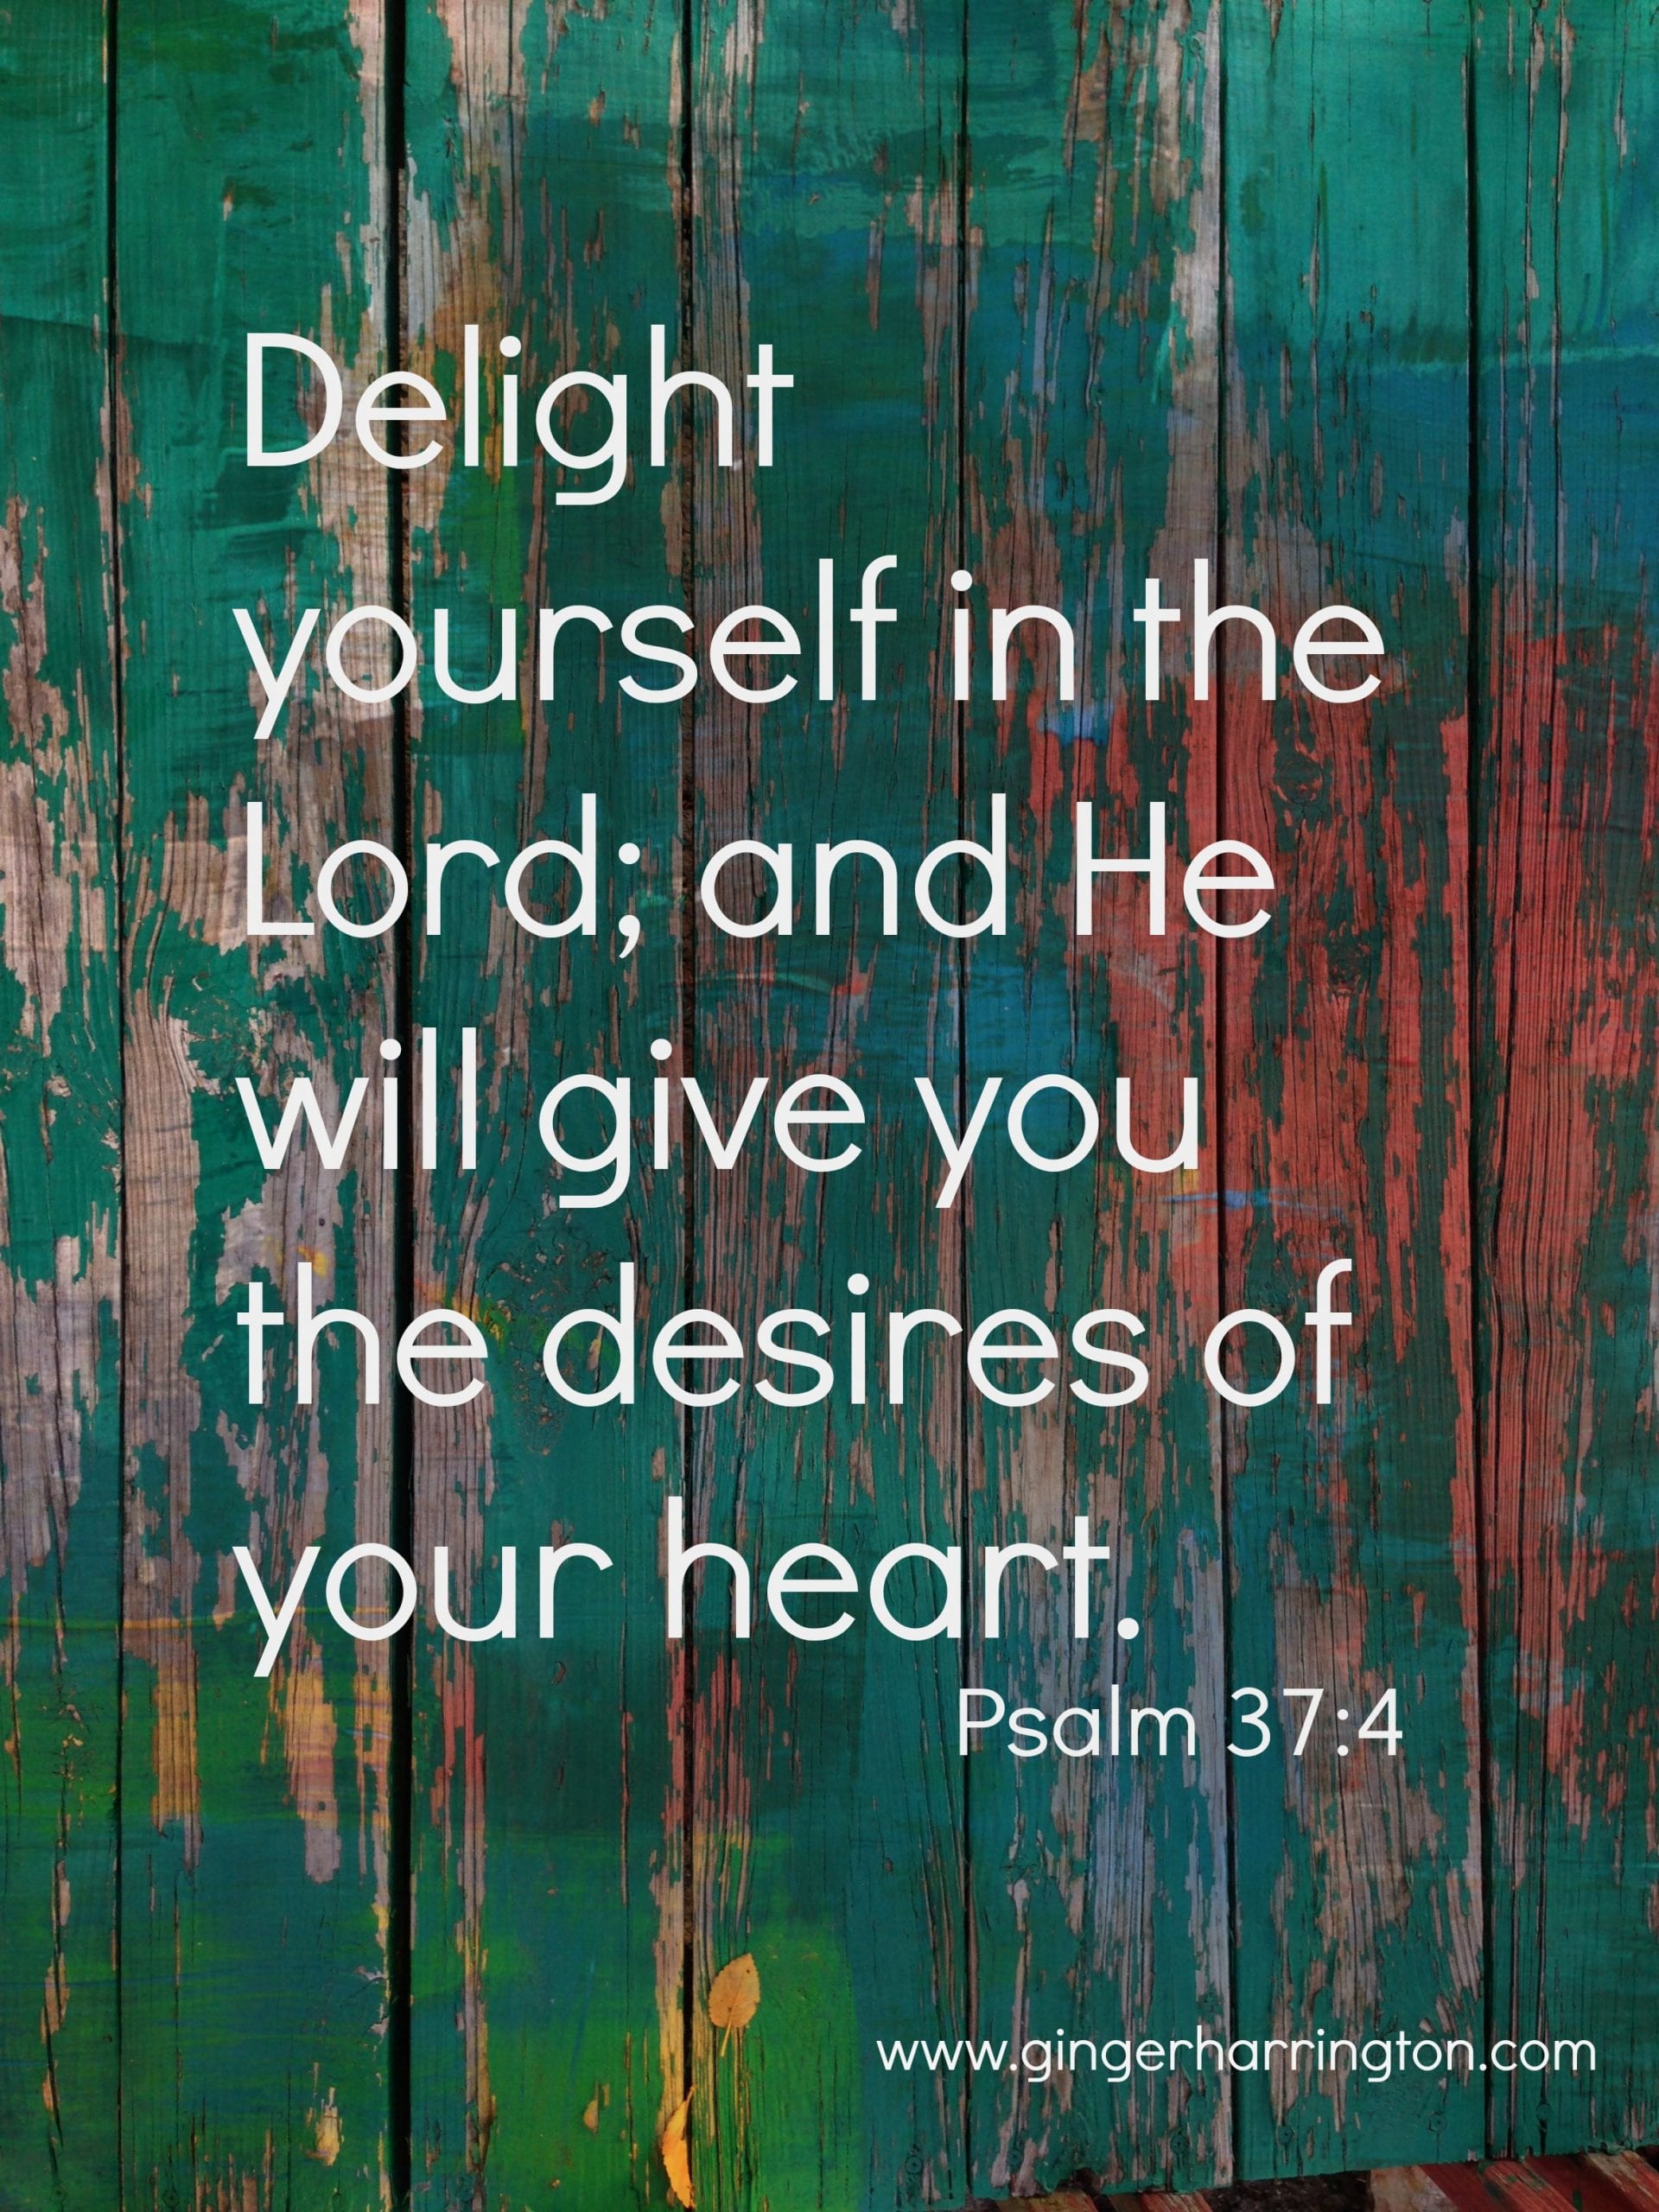 How to Make the Most of Each Day This Year: Delighting in God, Part 2